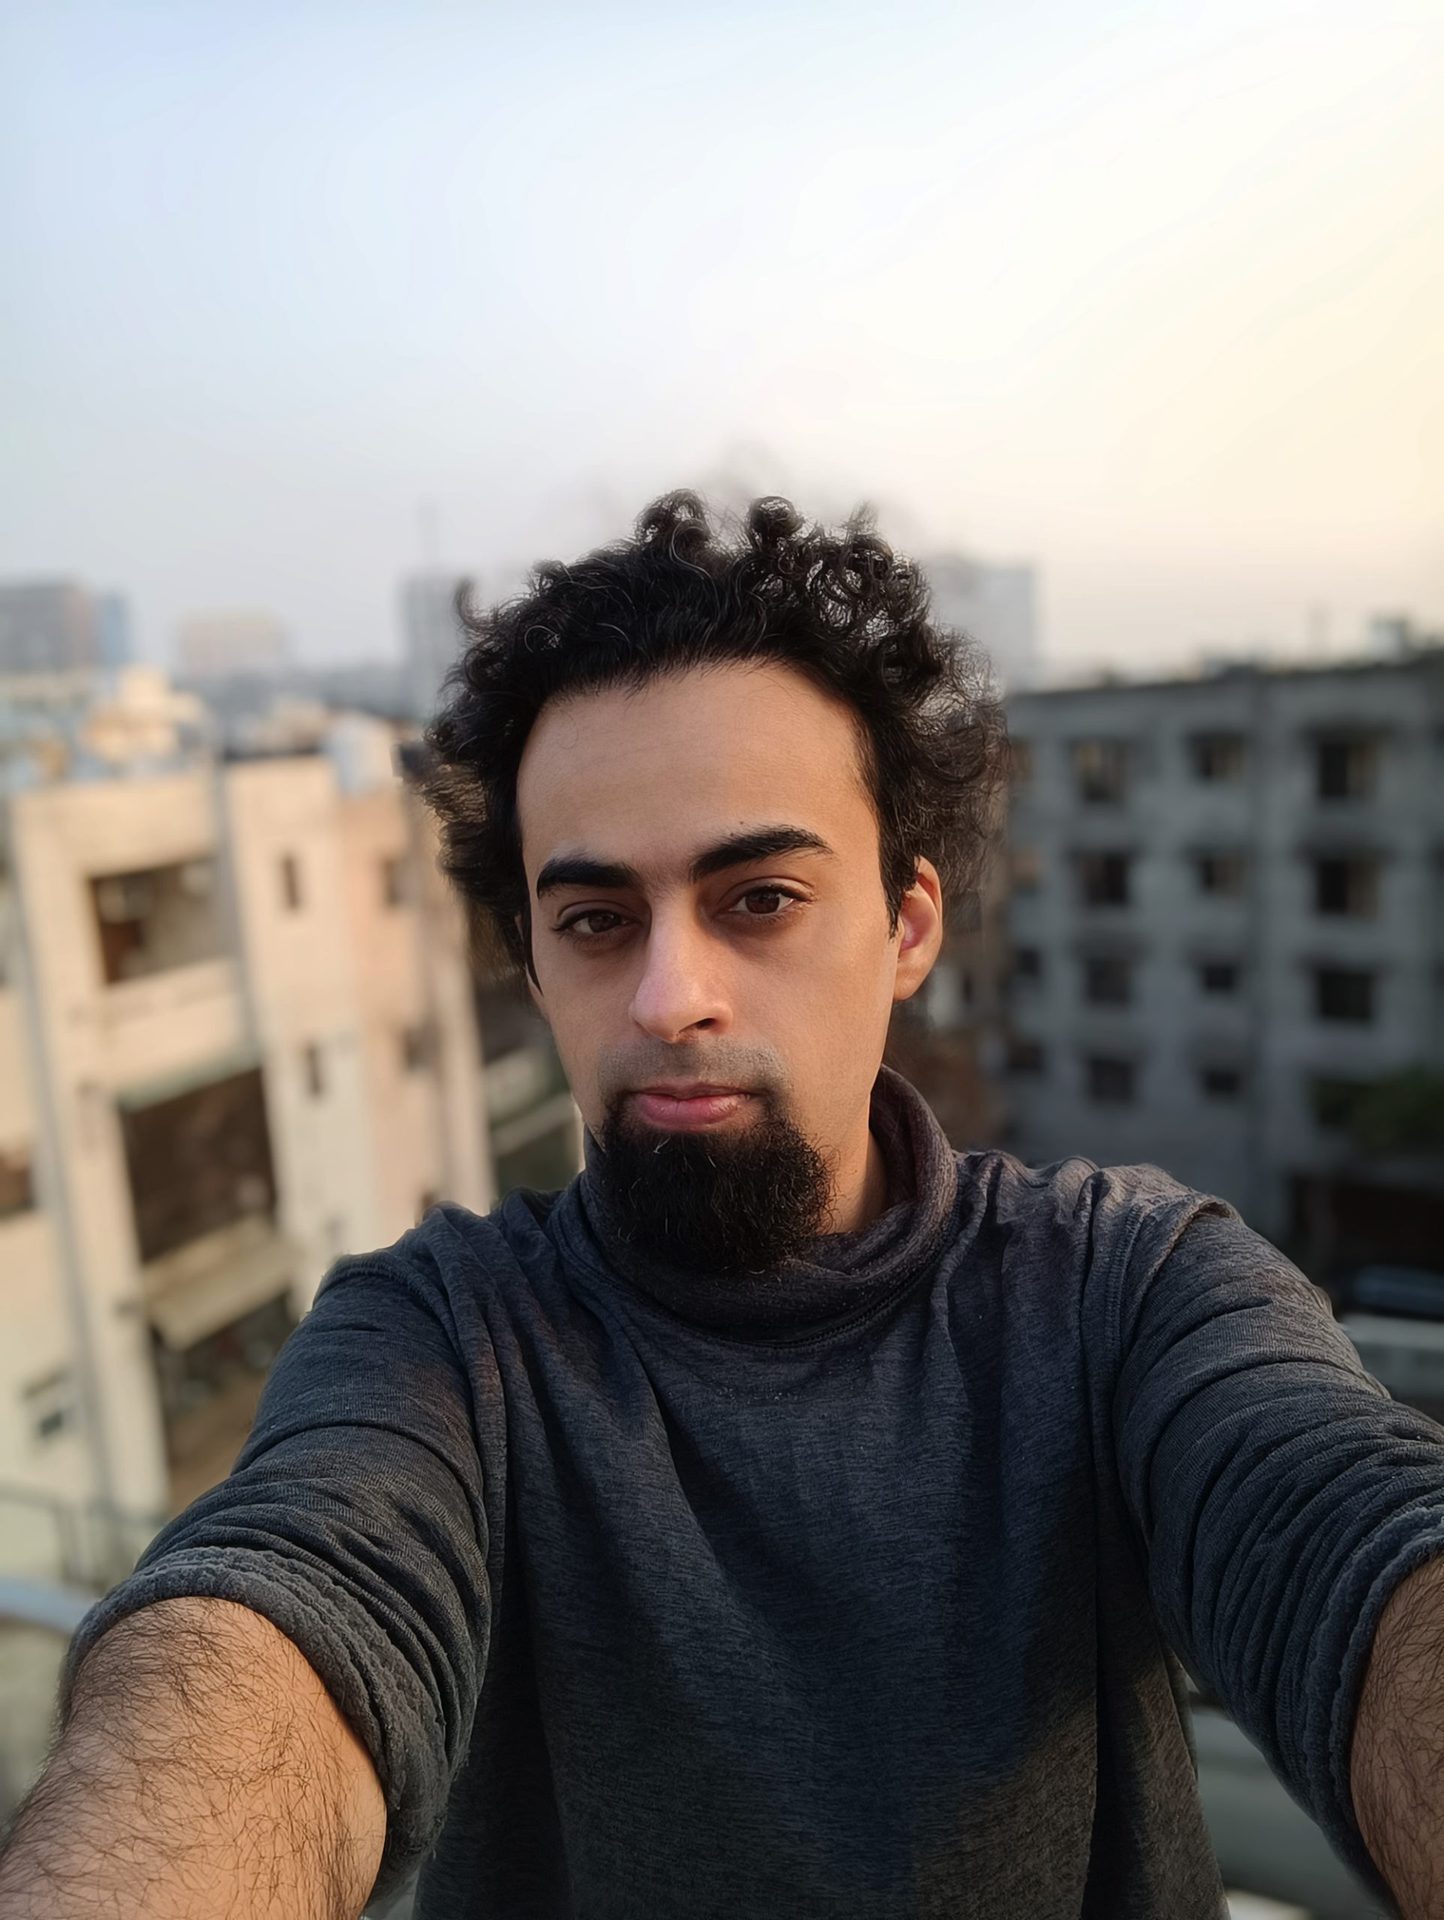 Mi 11i front camera portrait mode of a man with dark curly hair and a beard, with buildings visible behind him